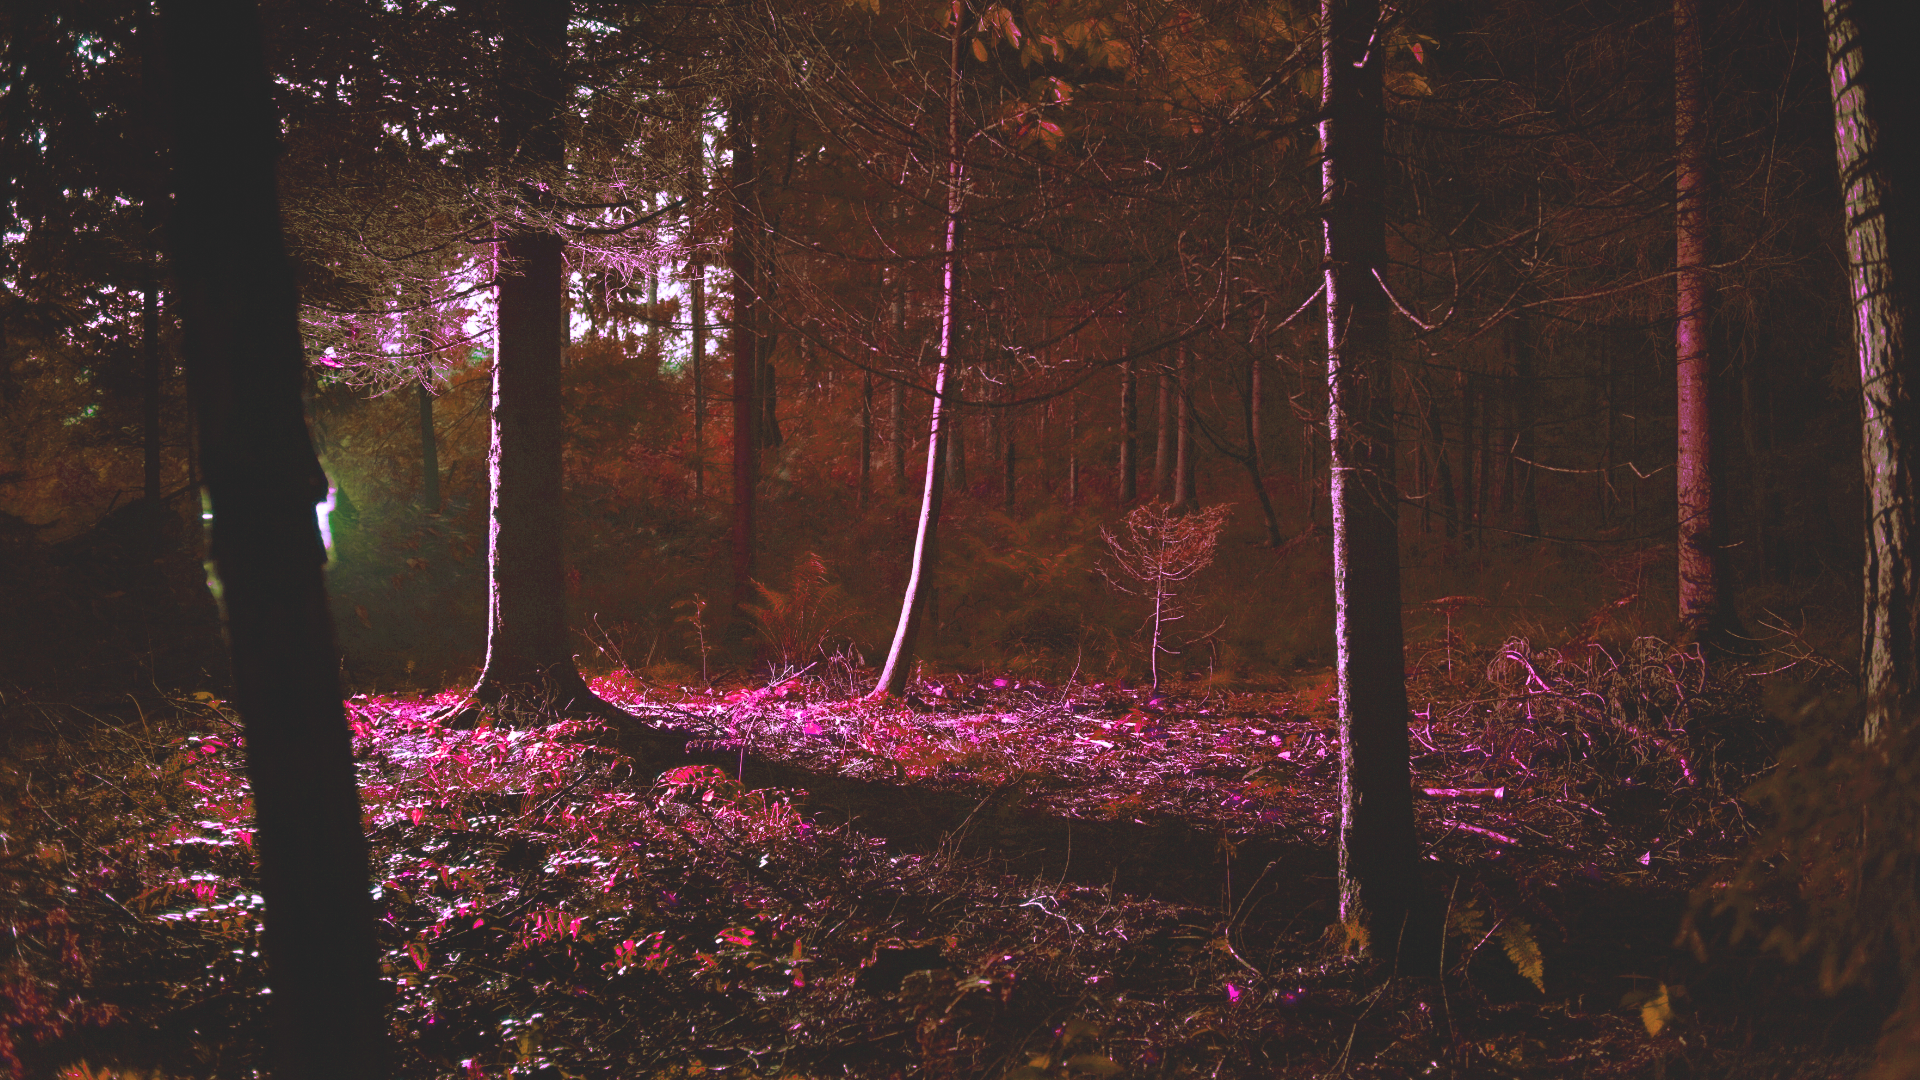 A dark forest with a red light shining throughout